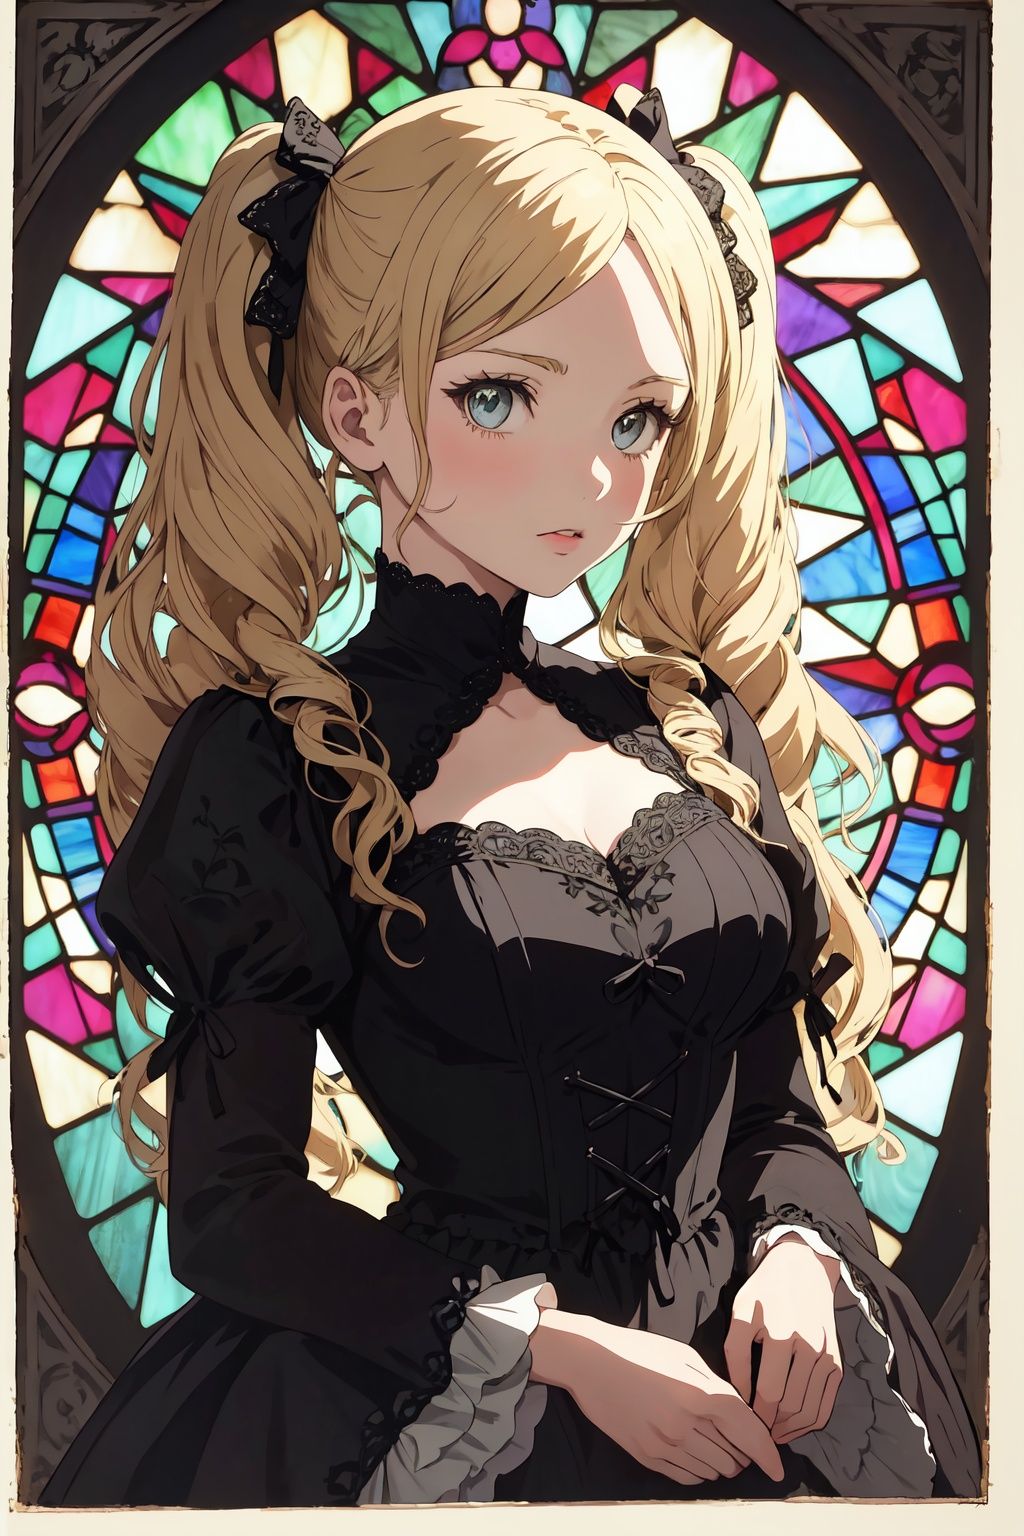  Illustration of a blonde anime twintails wavy hair girl wearing a Gothic lace dress in the style of the Edwardian era, captured in a vintage etching. Her dress is adorned with intricate details reminiscent of Damascus steel. beautiful colorful stained glass ,twintails, cute